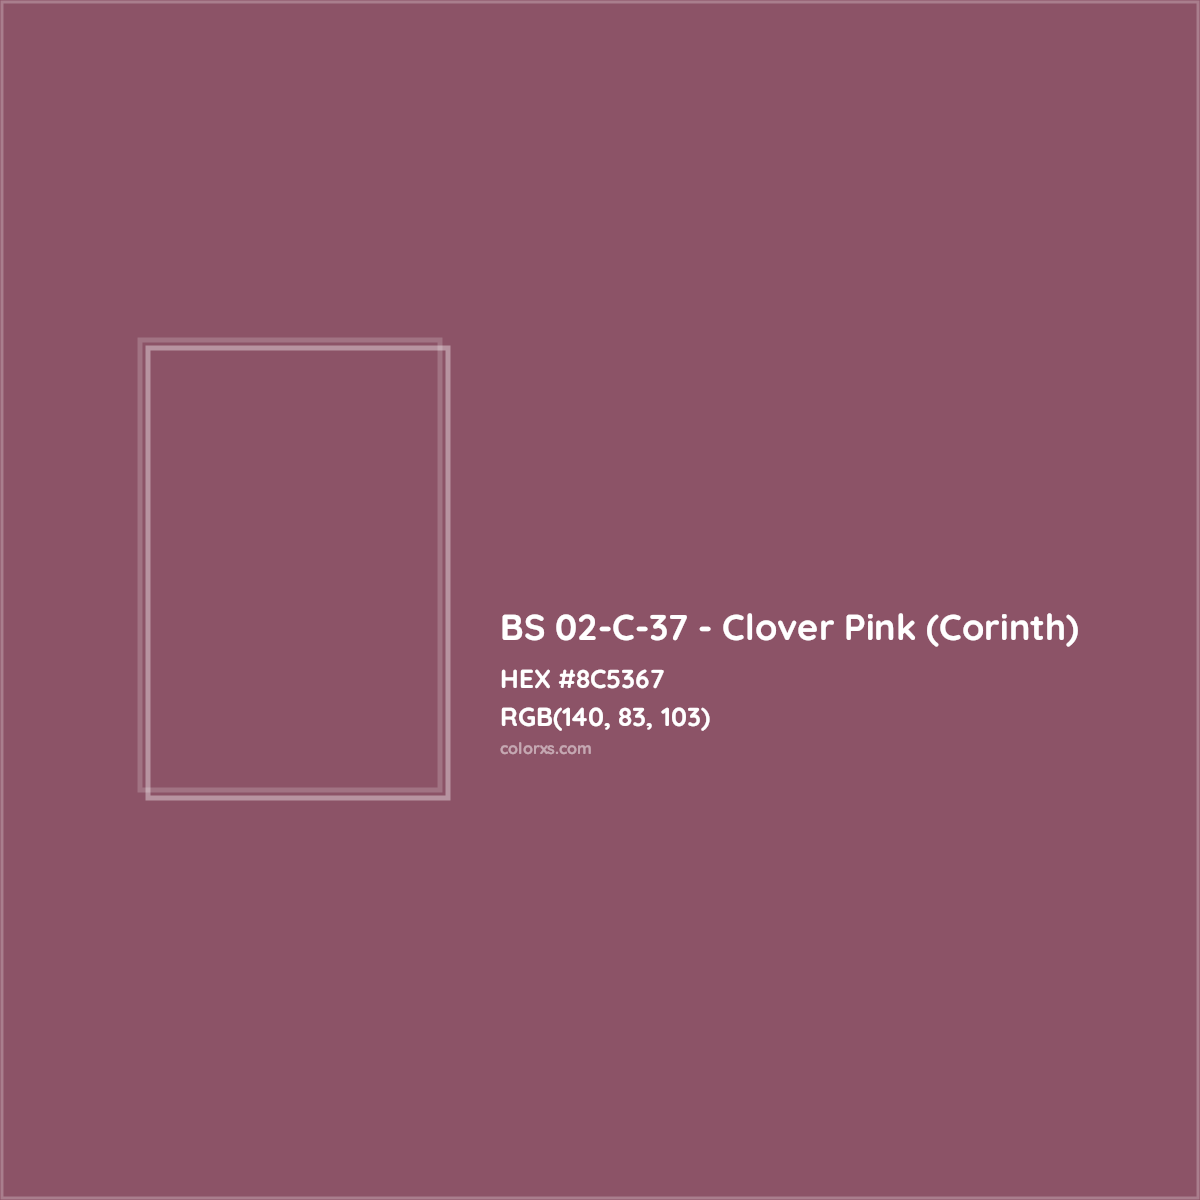 HEX #8C5367 BS 02-C-37 - Clover Pink (Corinth) CMS British Standard 4800 - Color Code